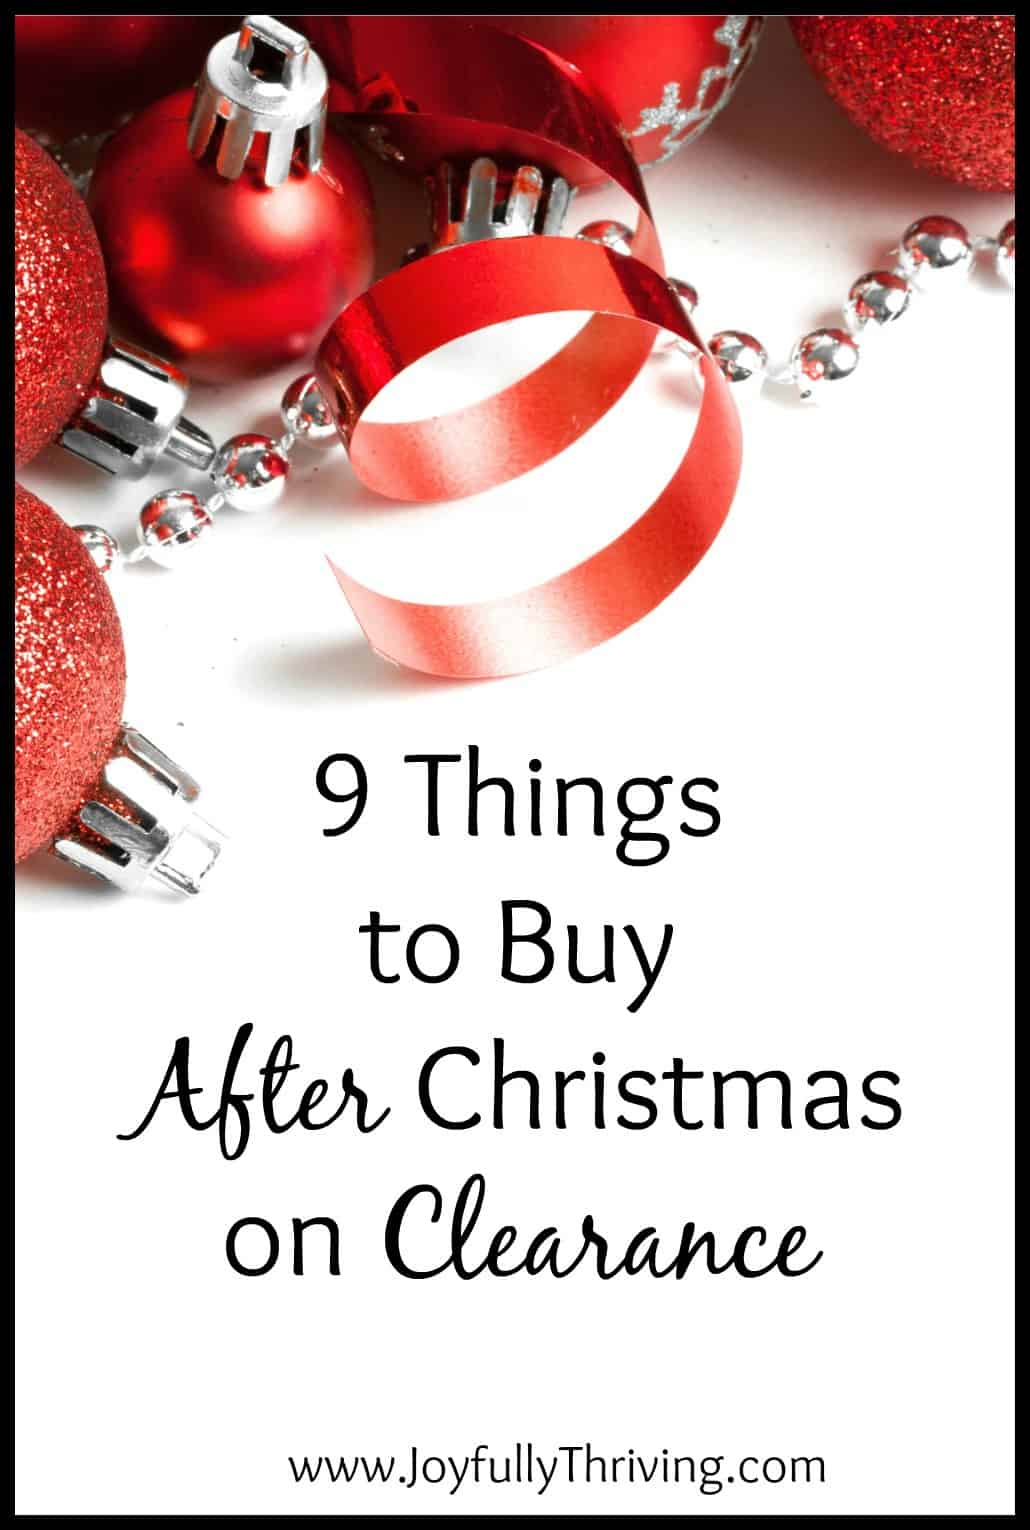 9 Things To Buy After Christmas On Clearance,Home Landscape Design In Nigeria